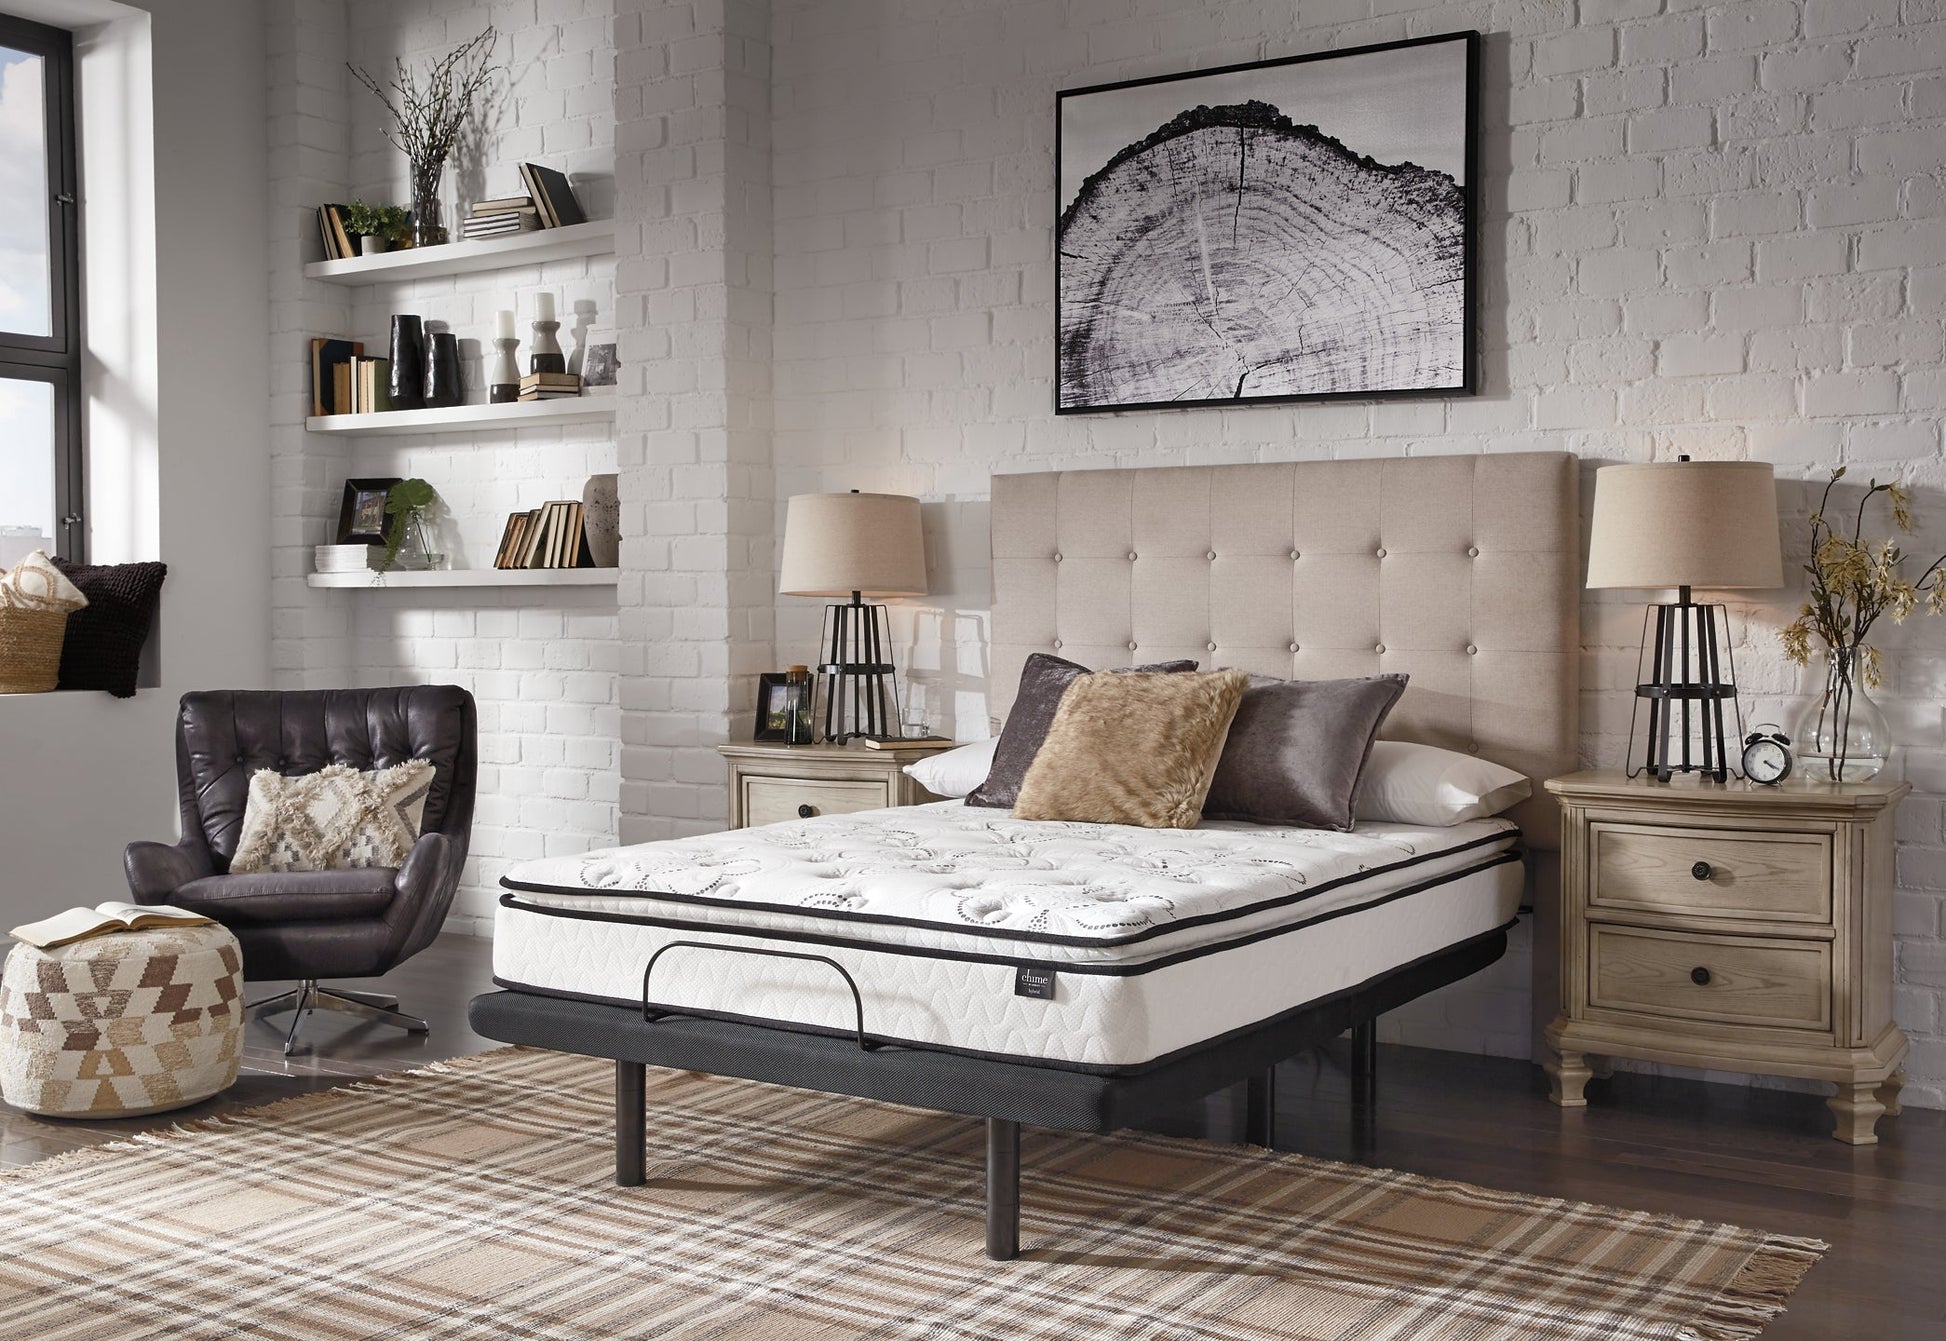 10 Inch Bonnell PT Mattress with Adjustable Base Rent Wise Rent To Own Jacksonville, Florida